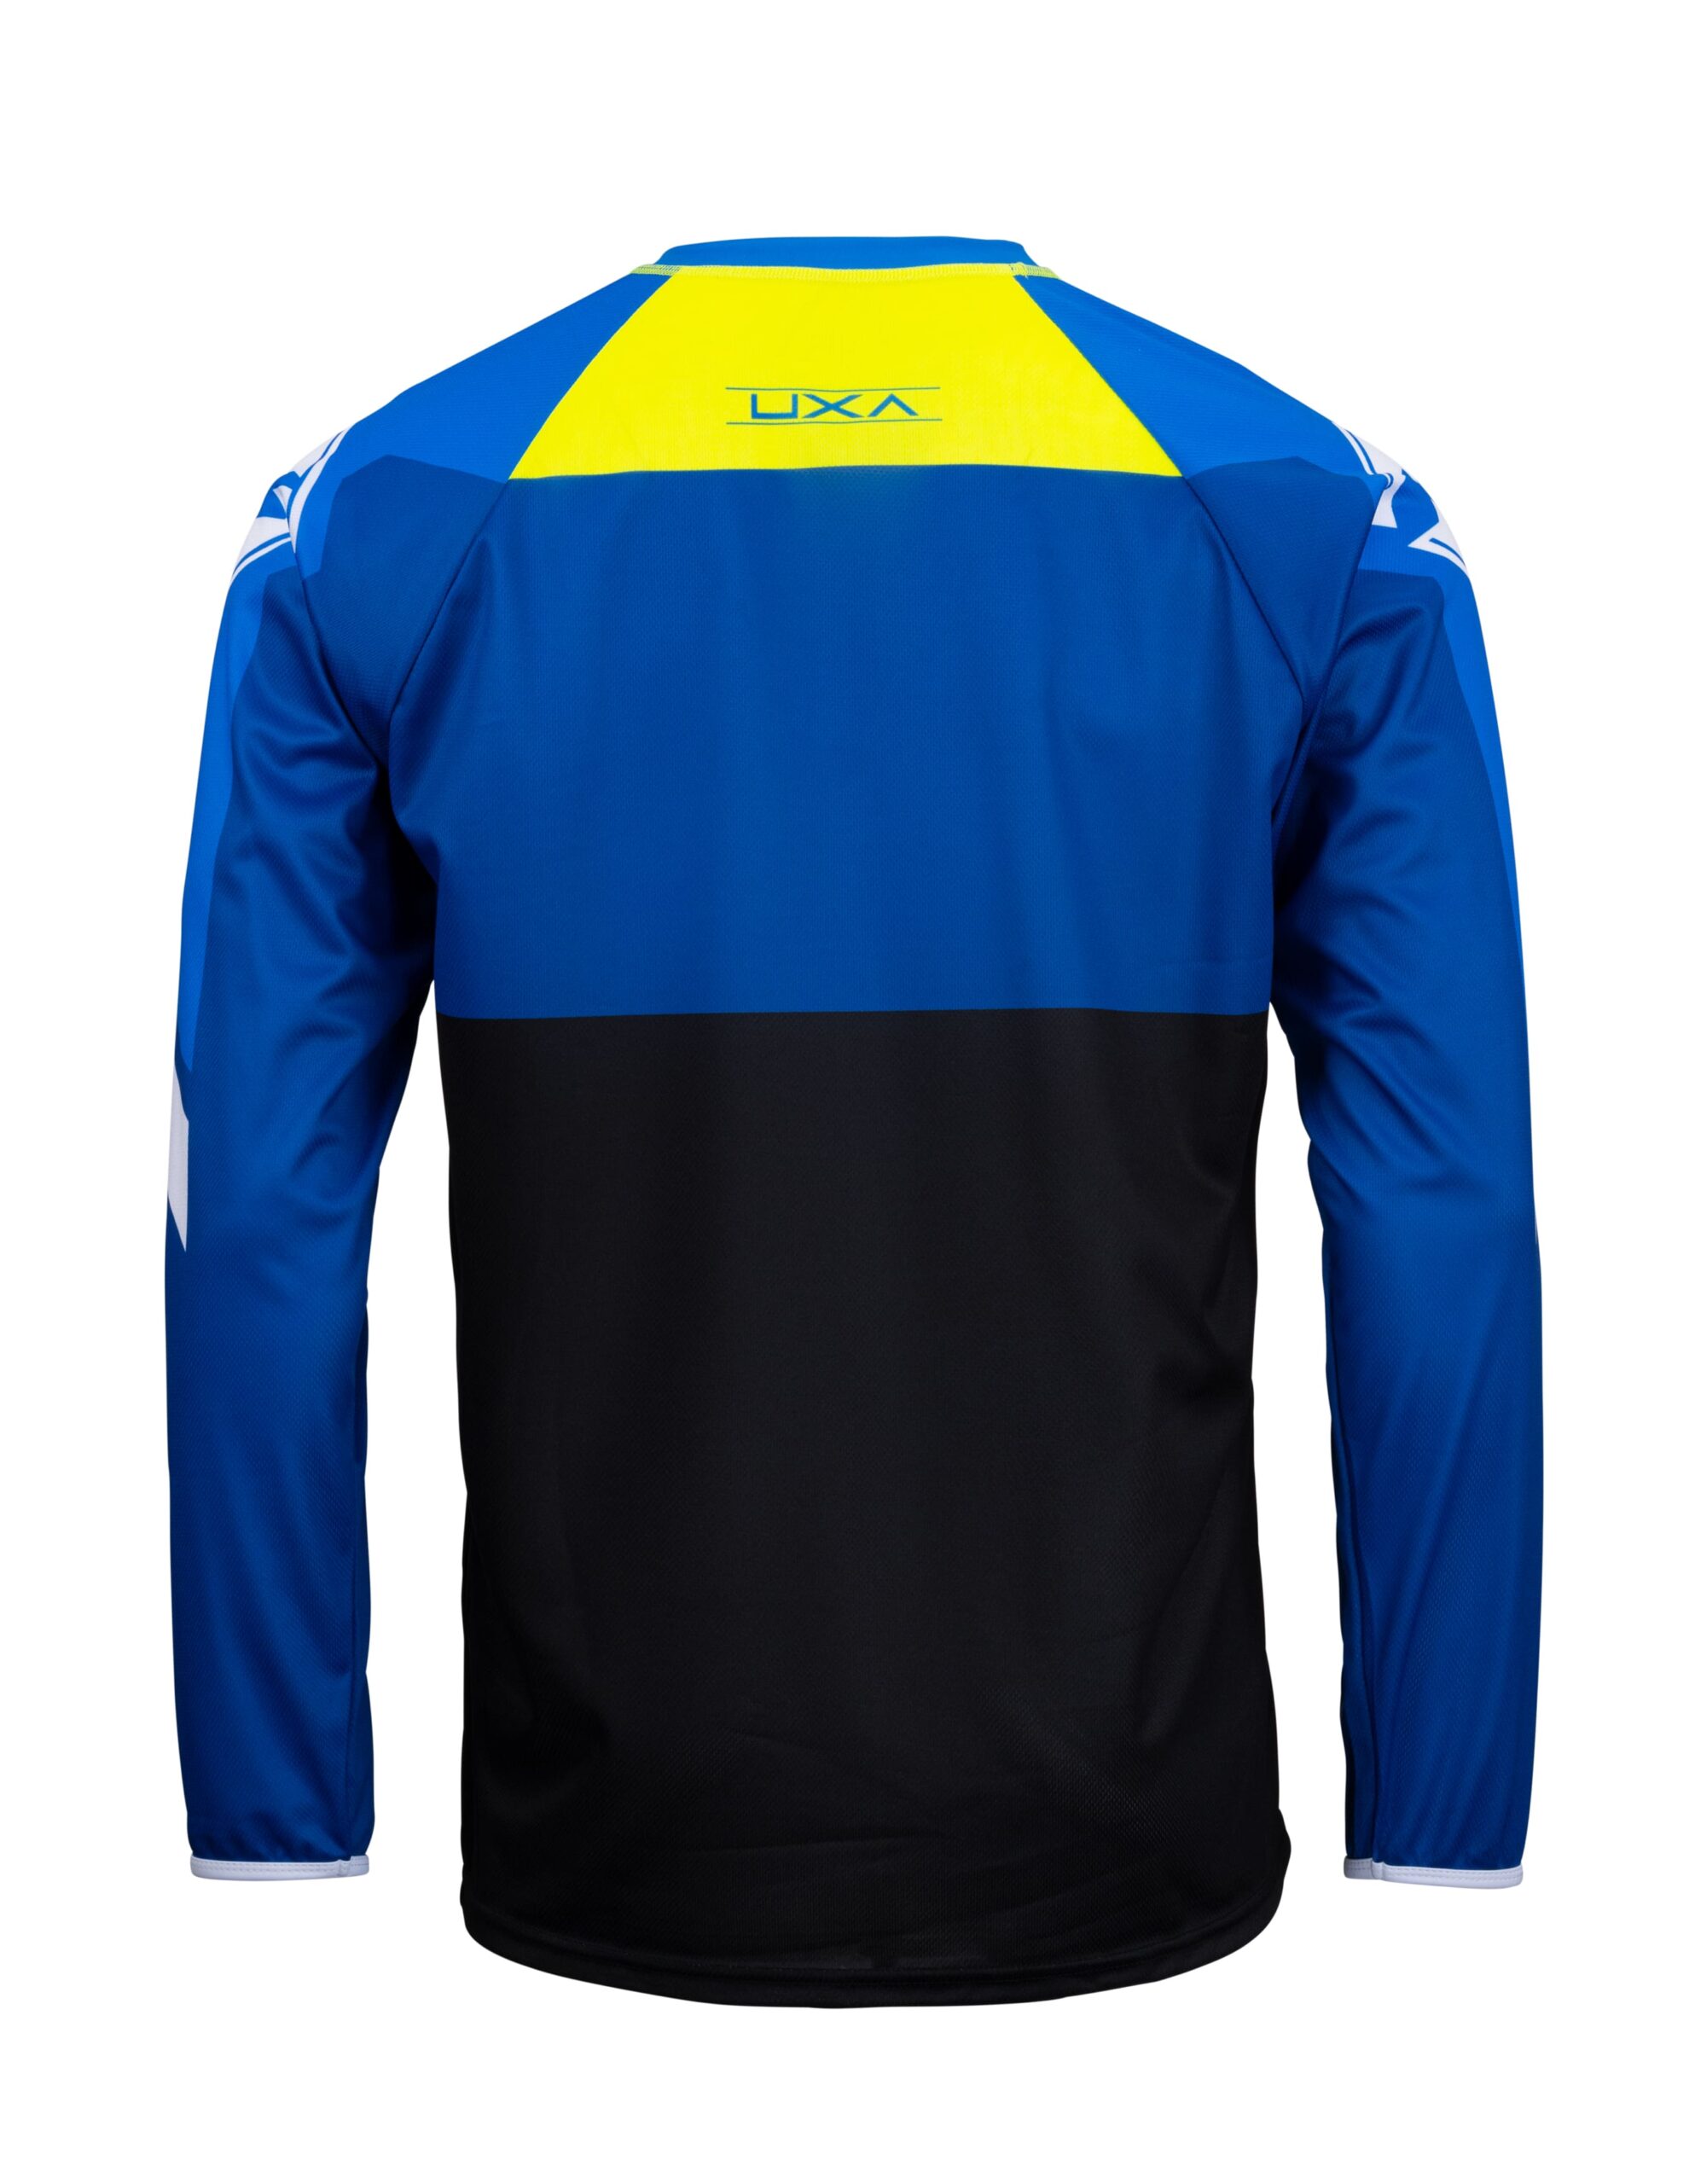 maillot_motocross_kenny_force_blue